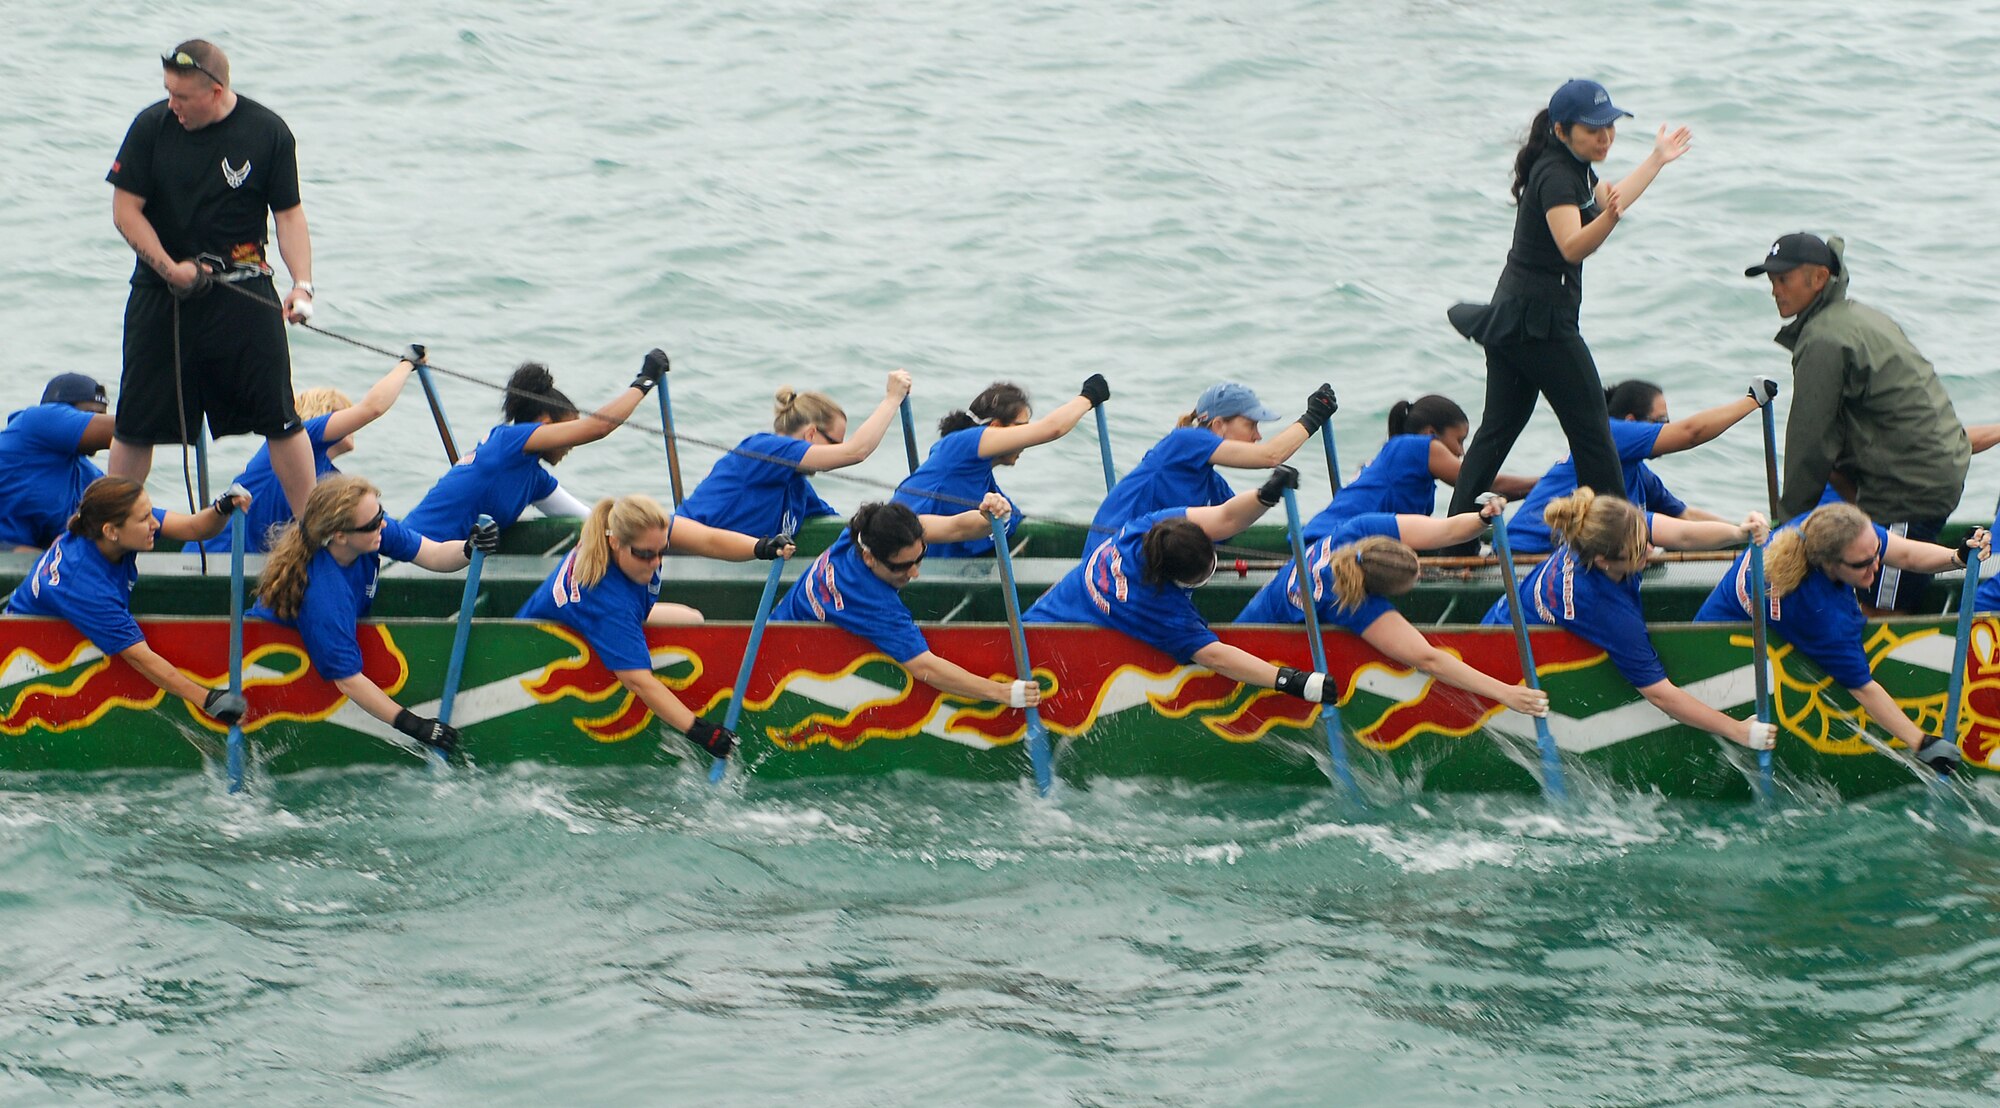 The Kadena Air Base Women's team pulls ahead of the competition during the Dragon Boat Race May 5, 2008 at Tomari Port in Naha City, Okinawa, Japan. The race is an annual tradition held every May on Okinawa. (U.S. Air Force photo/Airman Chad Warren)(Released)